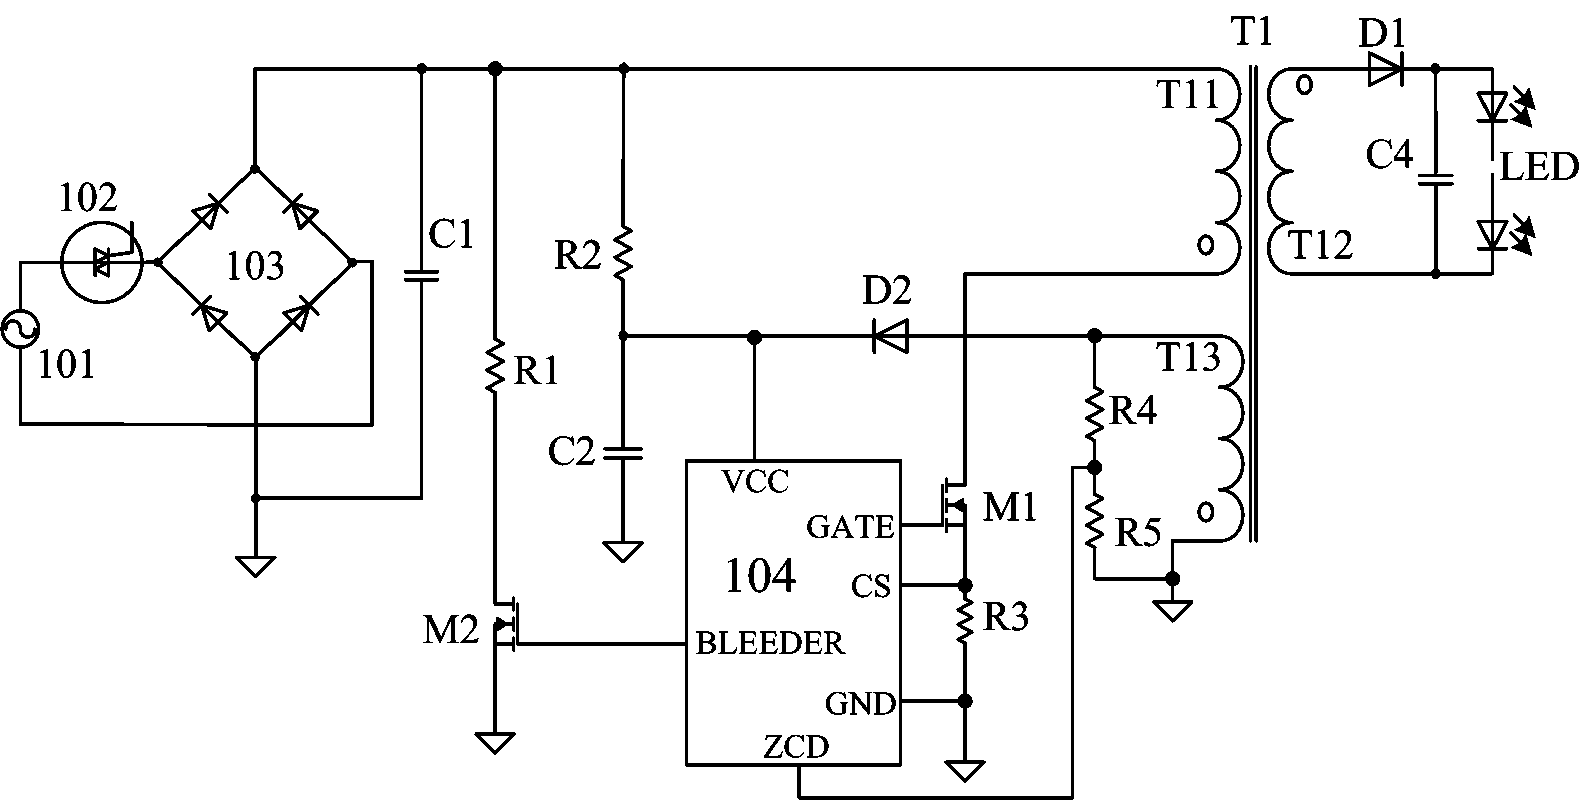 Bleeding control module and silicon-controlled dimming LED drive circuit and system